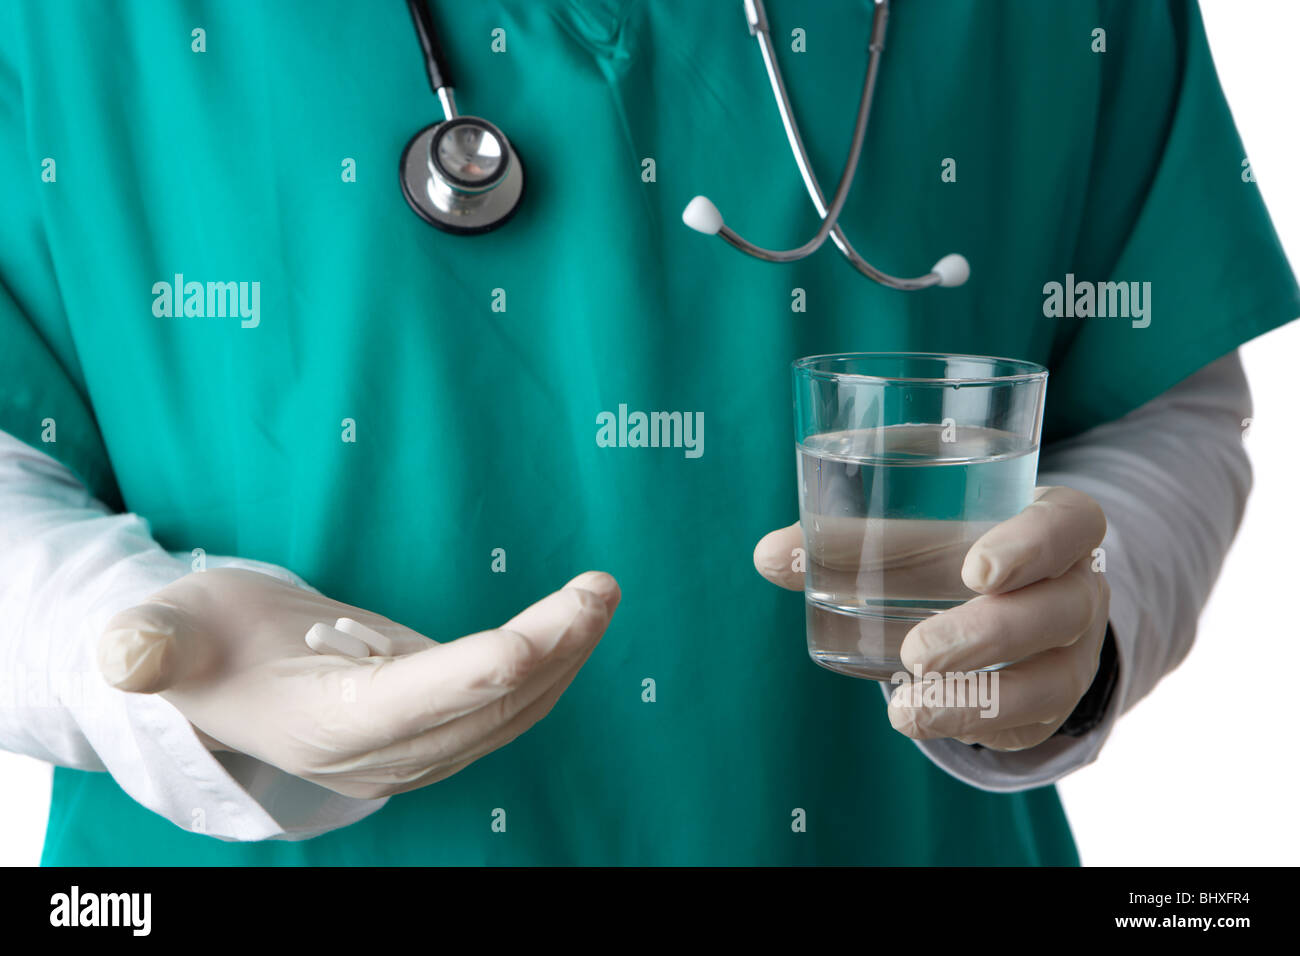 man wearing medical scrubs and stethoscope holding glass of water and pills Stock Photo